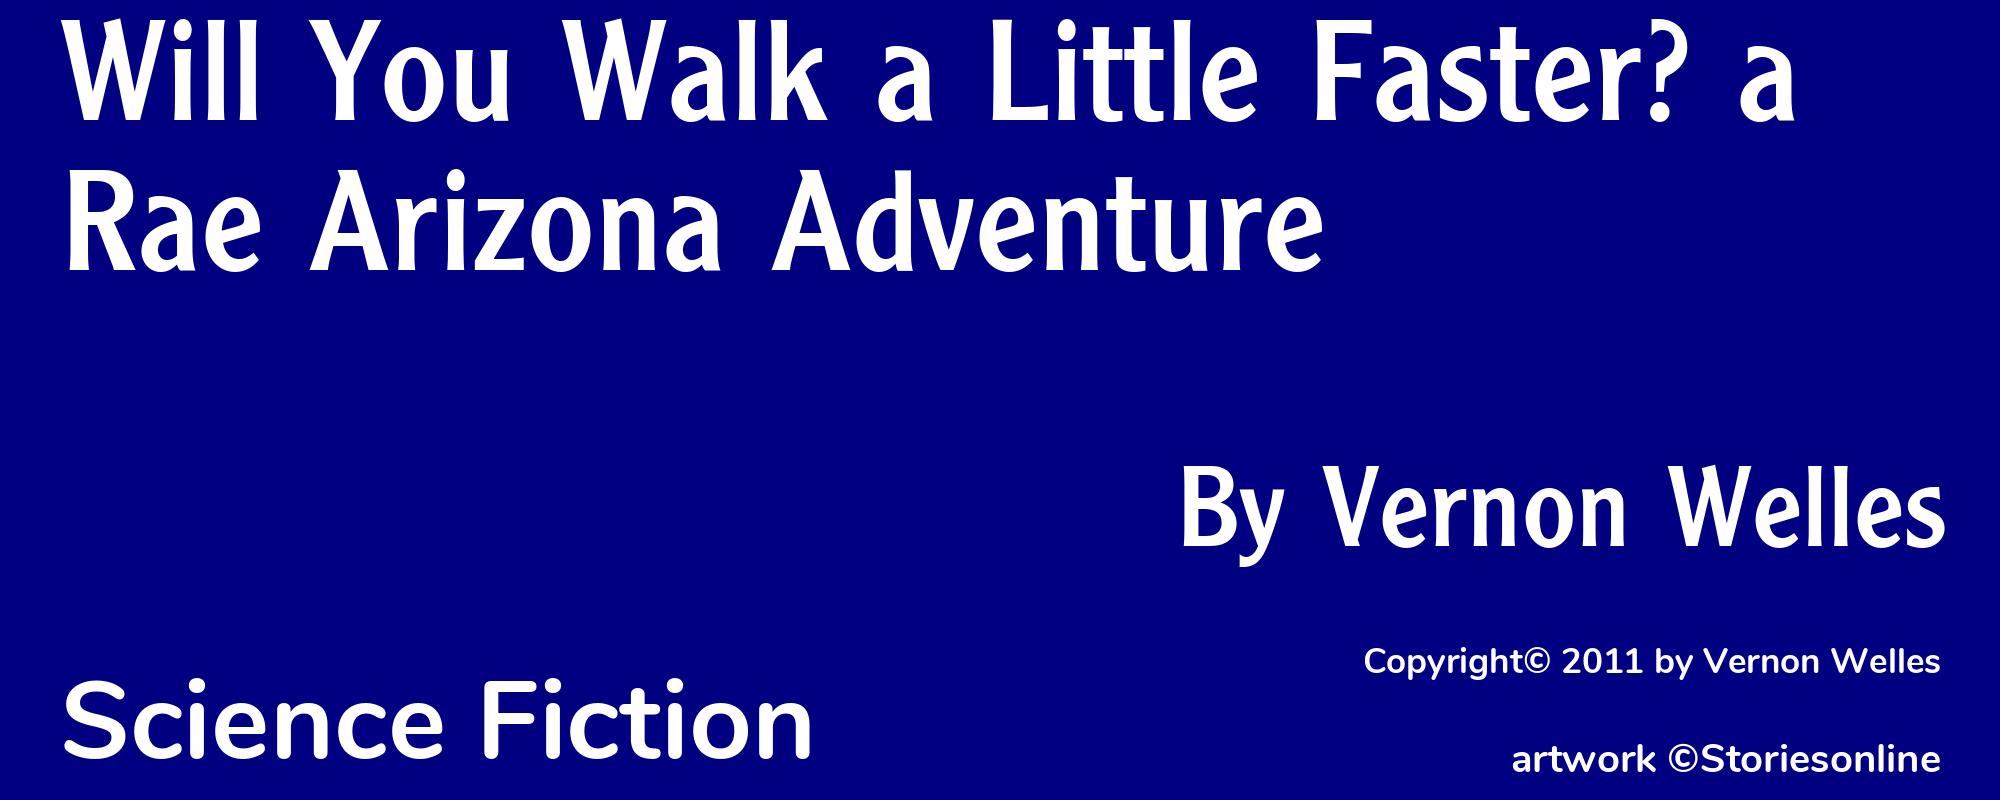 Will You Walk a Little Faster? a Rae Arizona Adventure - Cover